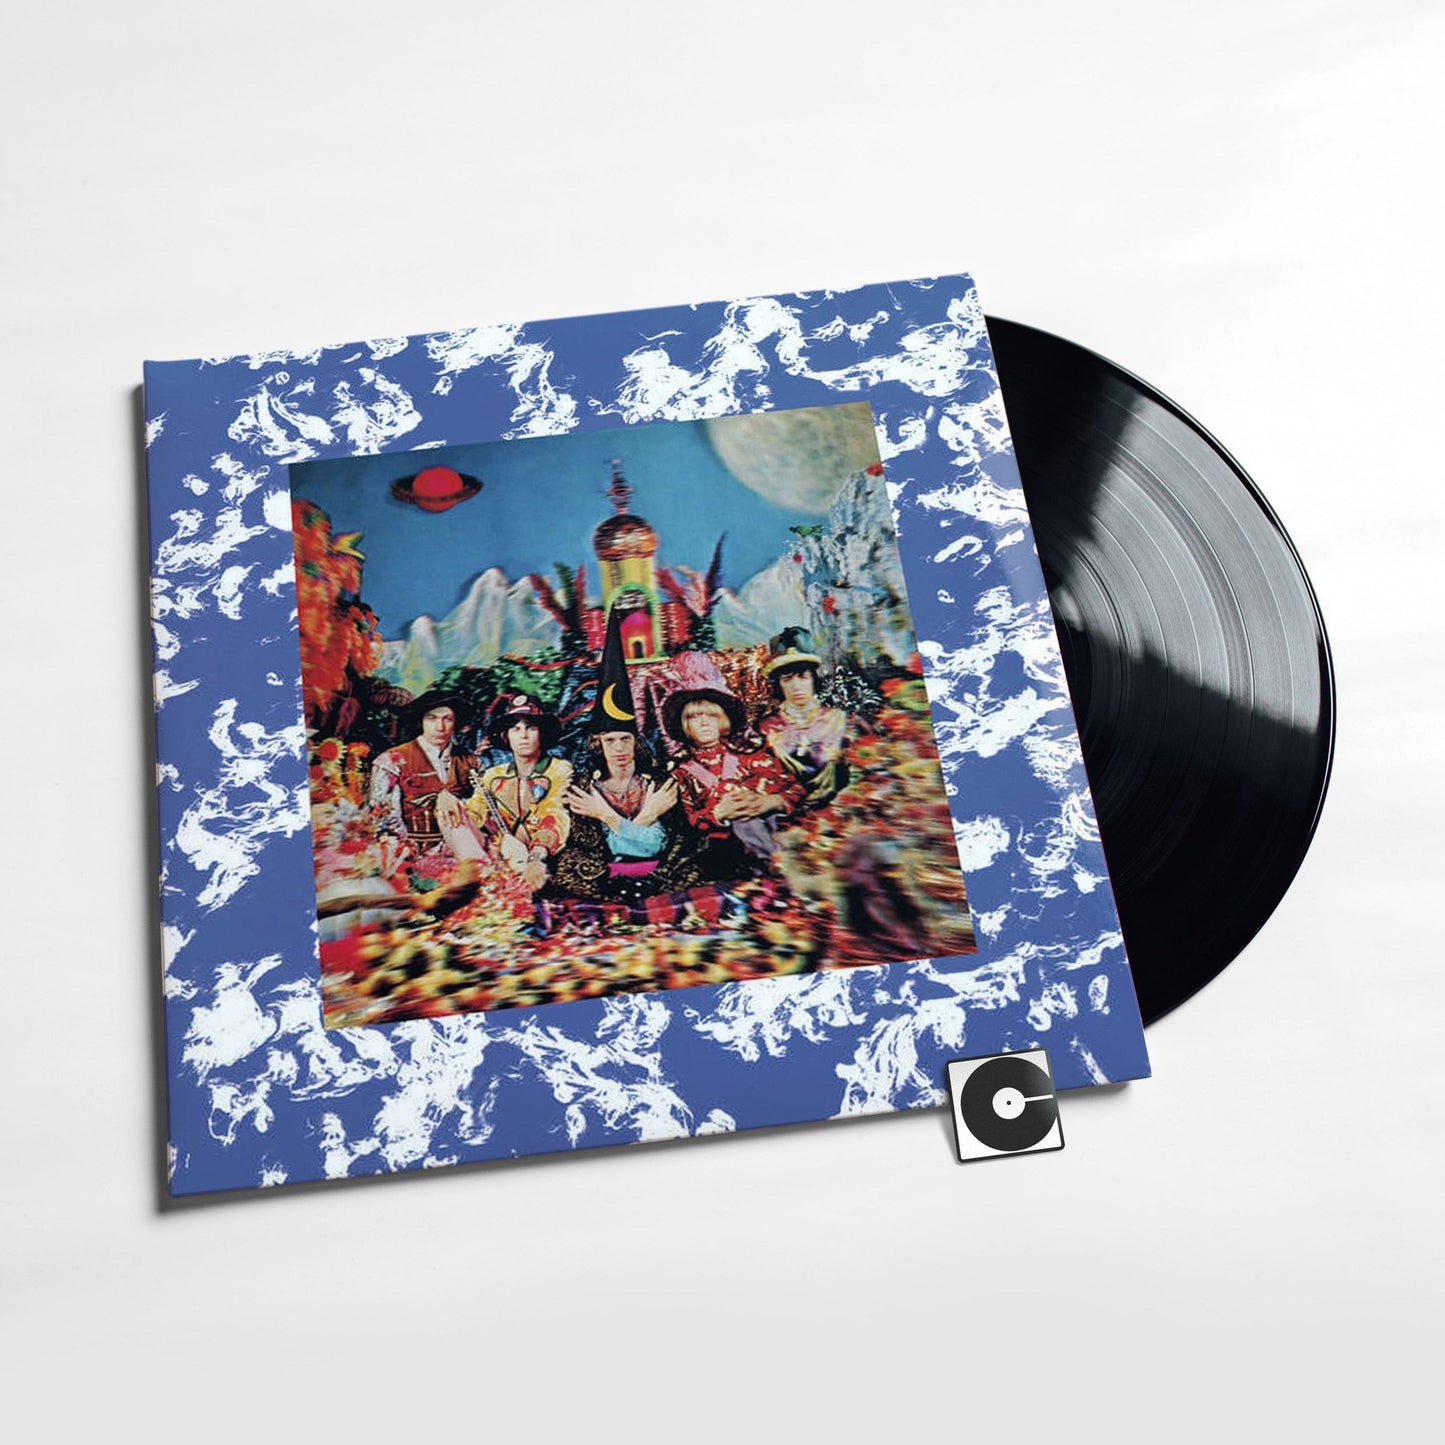 The Rolling Stones - "Their Satanic Majesties Request"